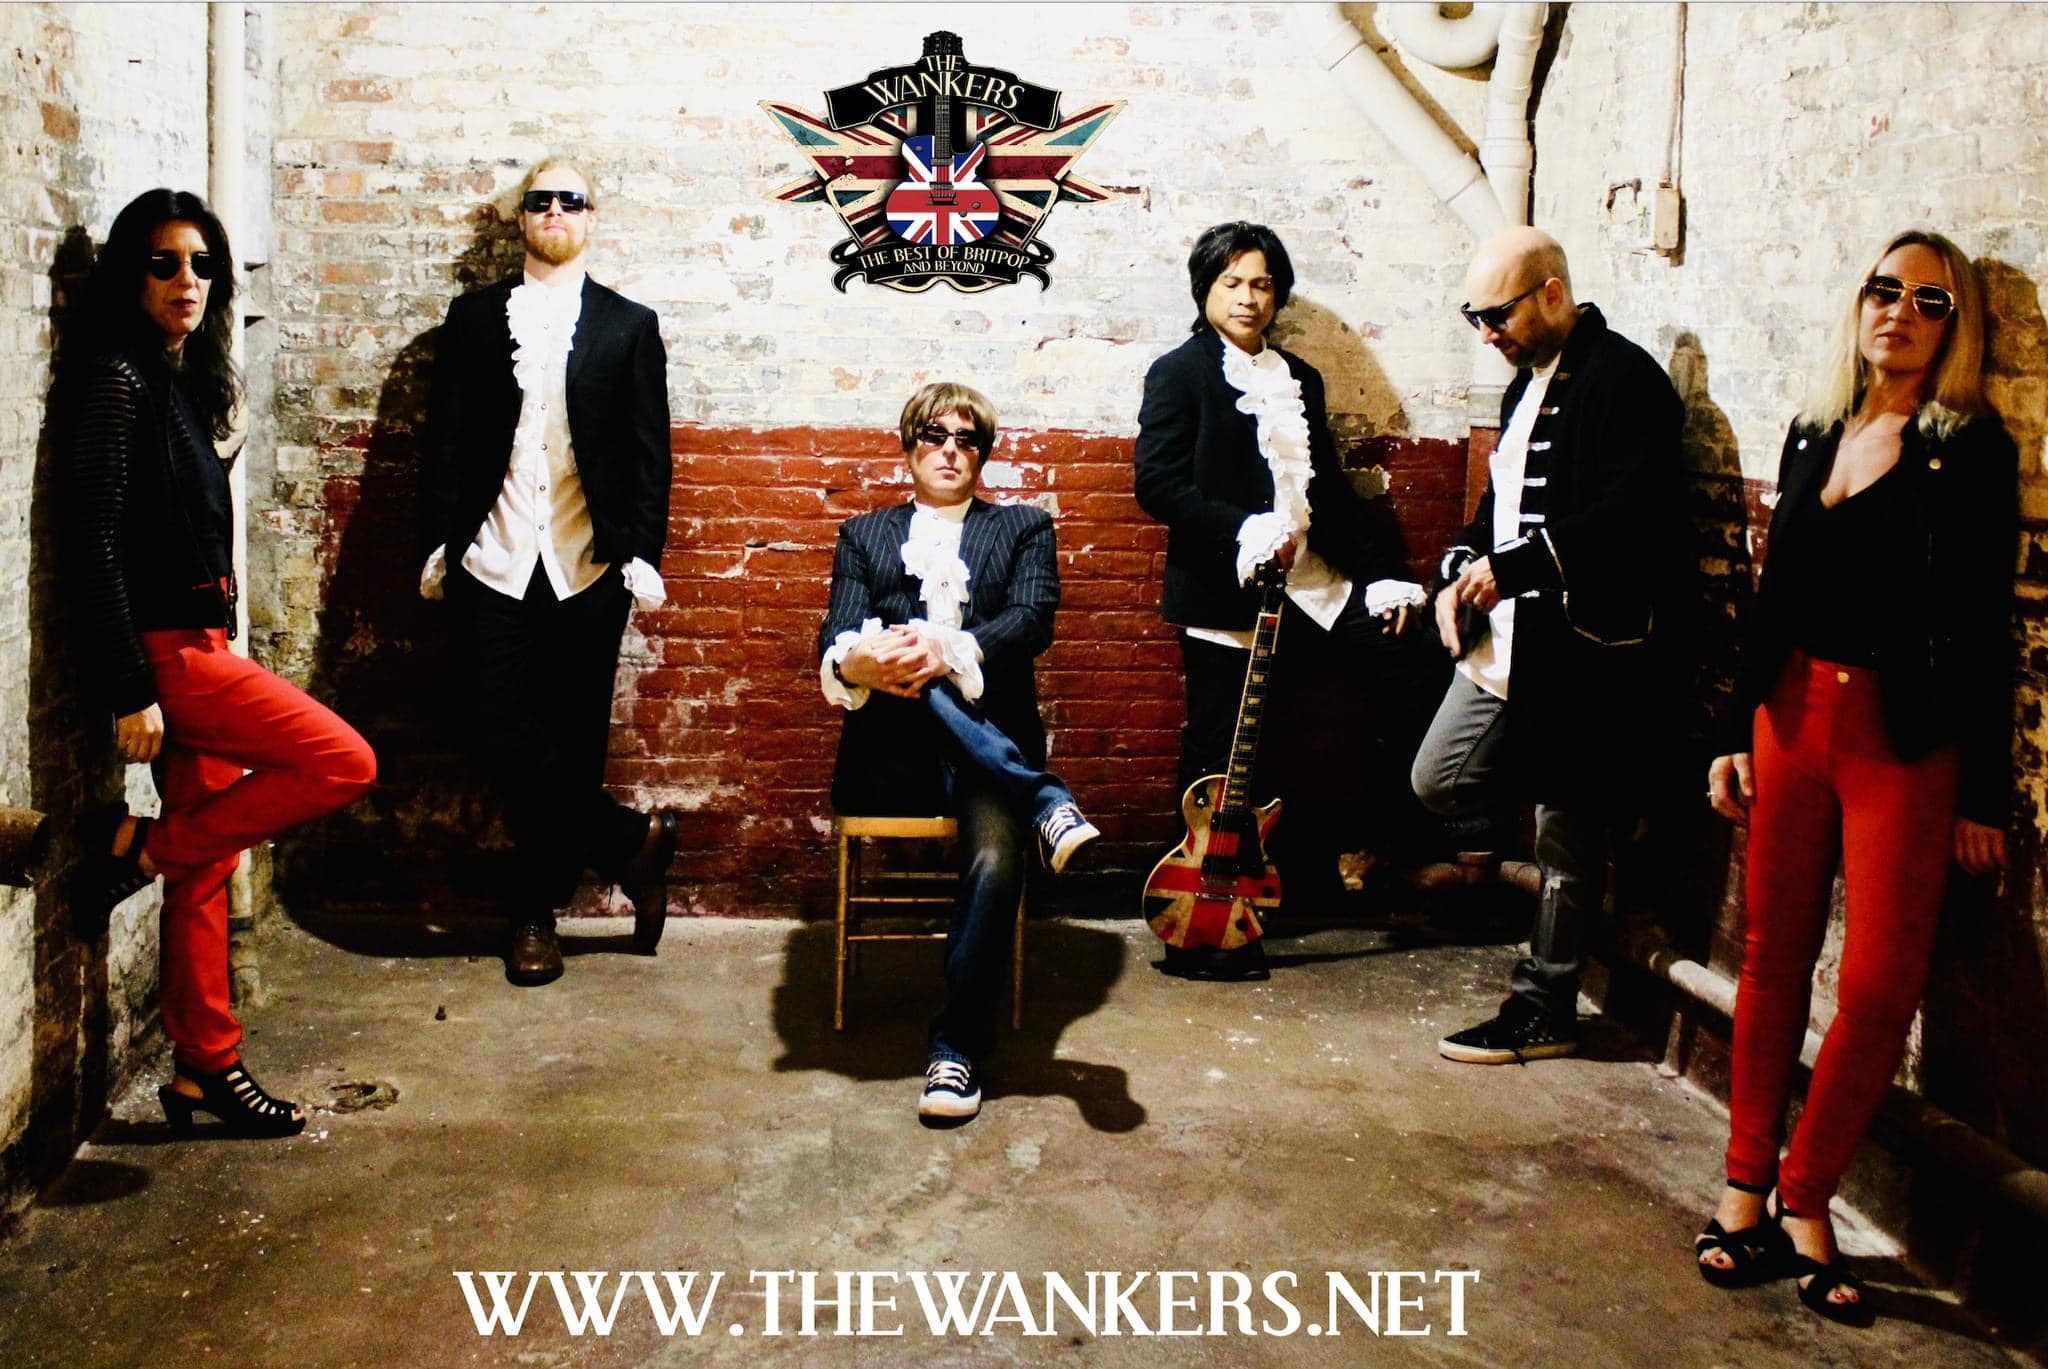 THUR. APR. 25: The Wankers: Ultimate Britpop (and beyond)